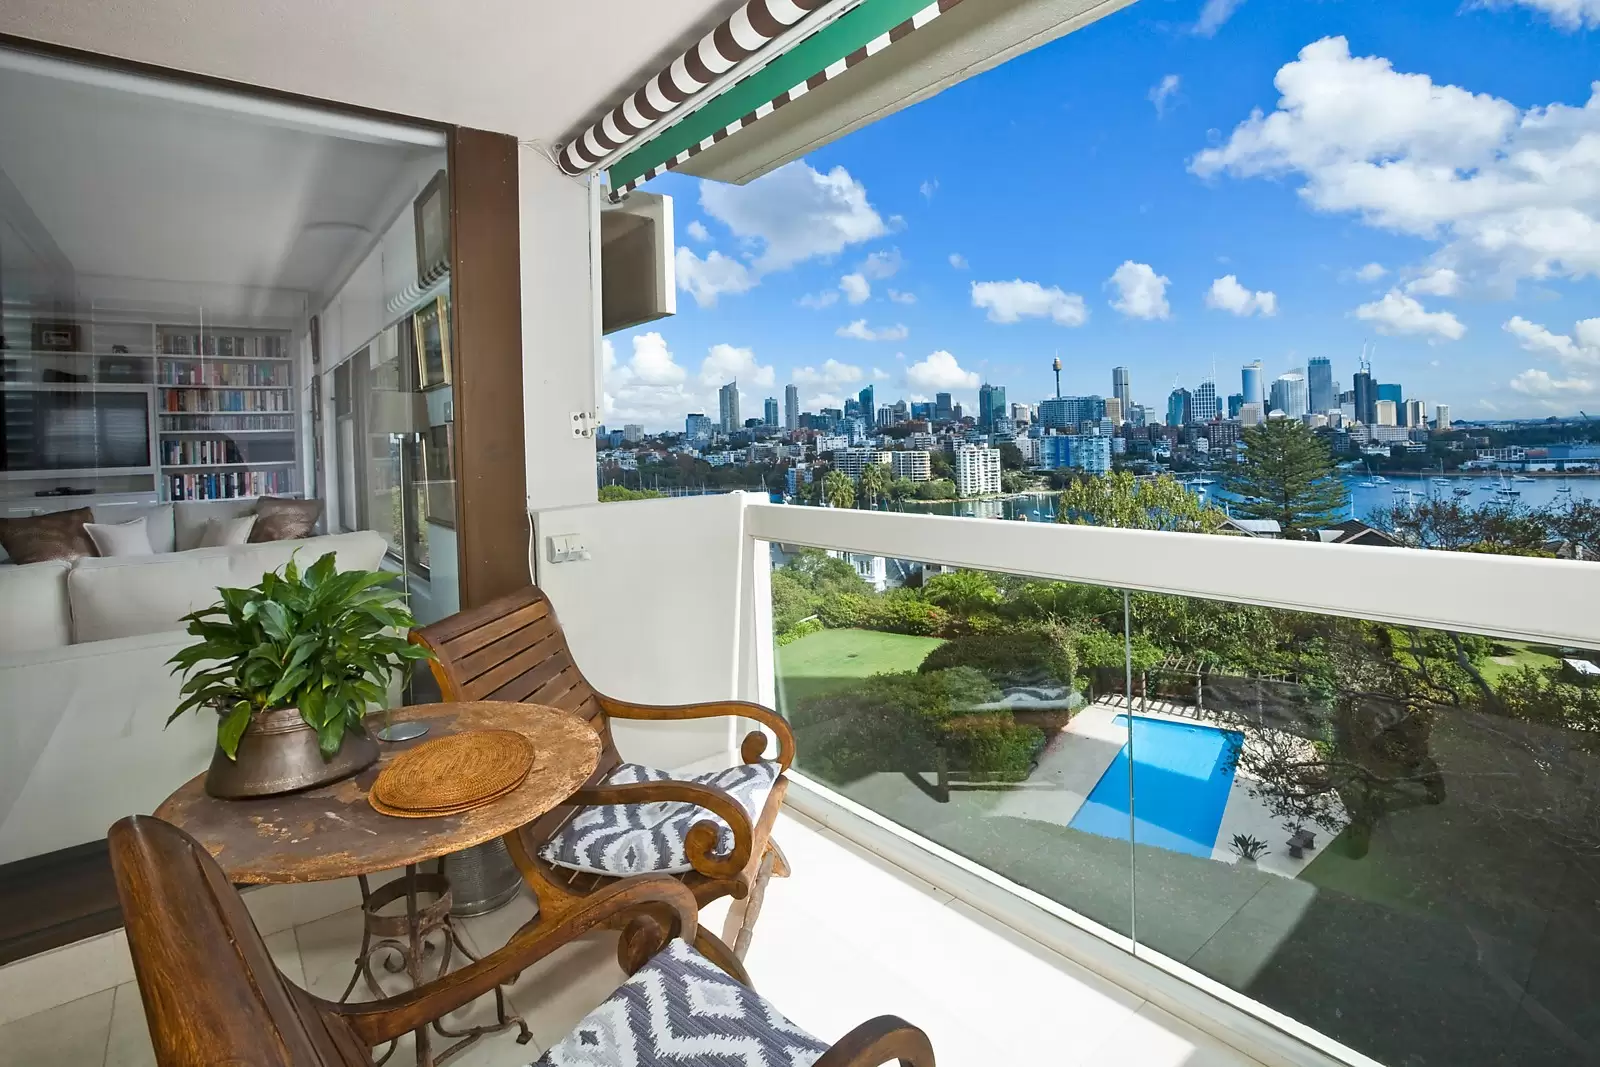 Photo #9: 8/60 Darling Point Road, Darling Point - Sold by Sydney Sotheby's International Realty